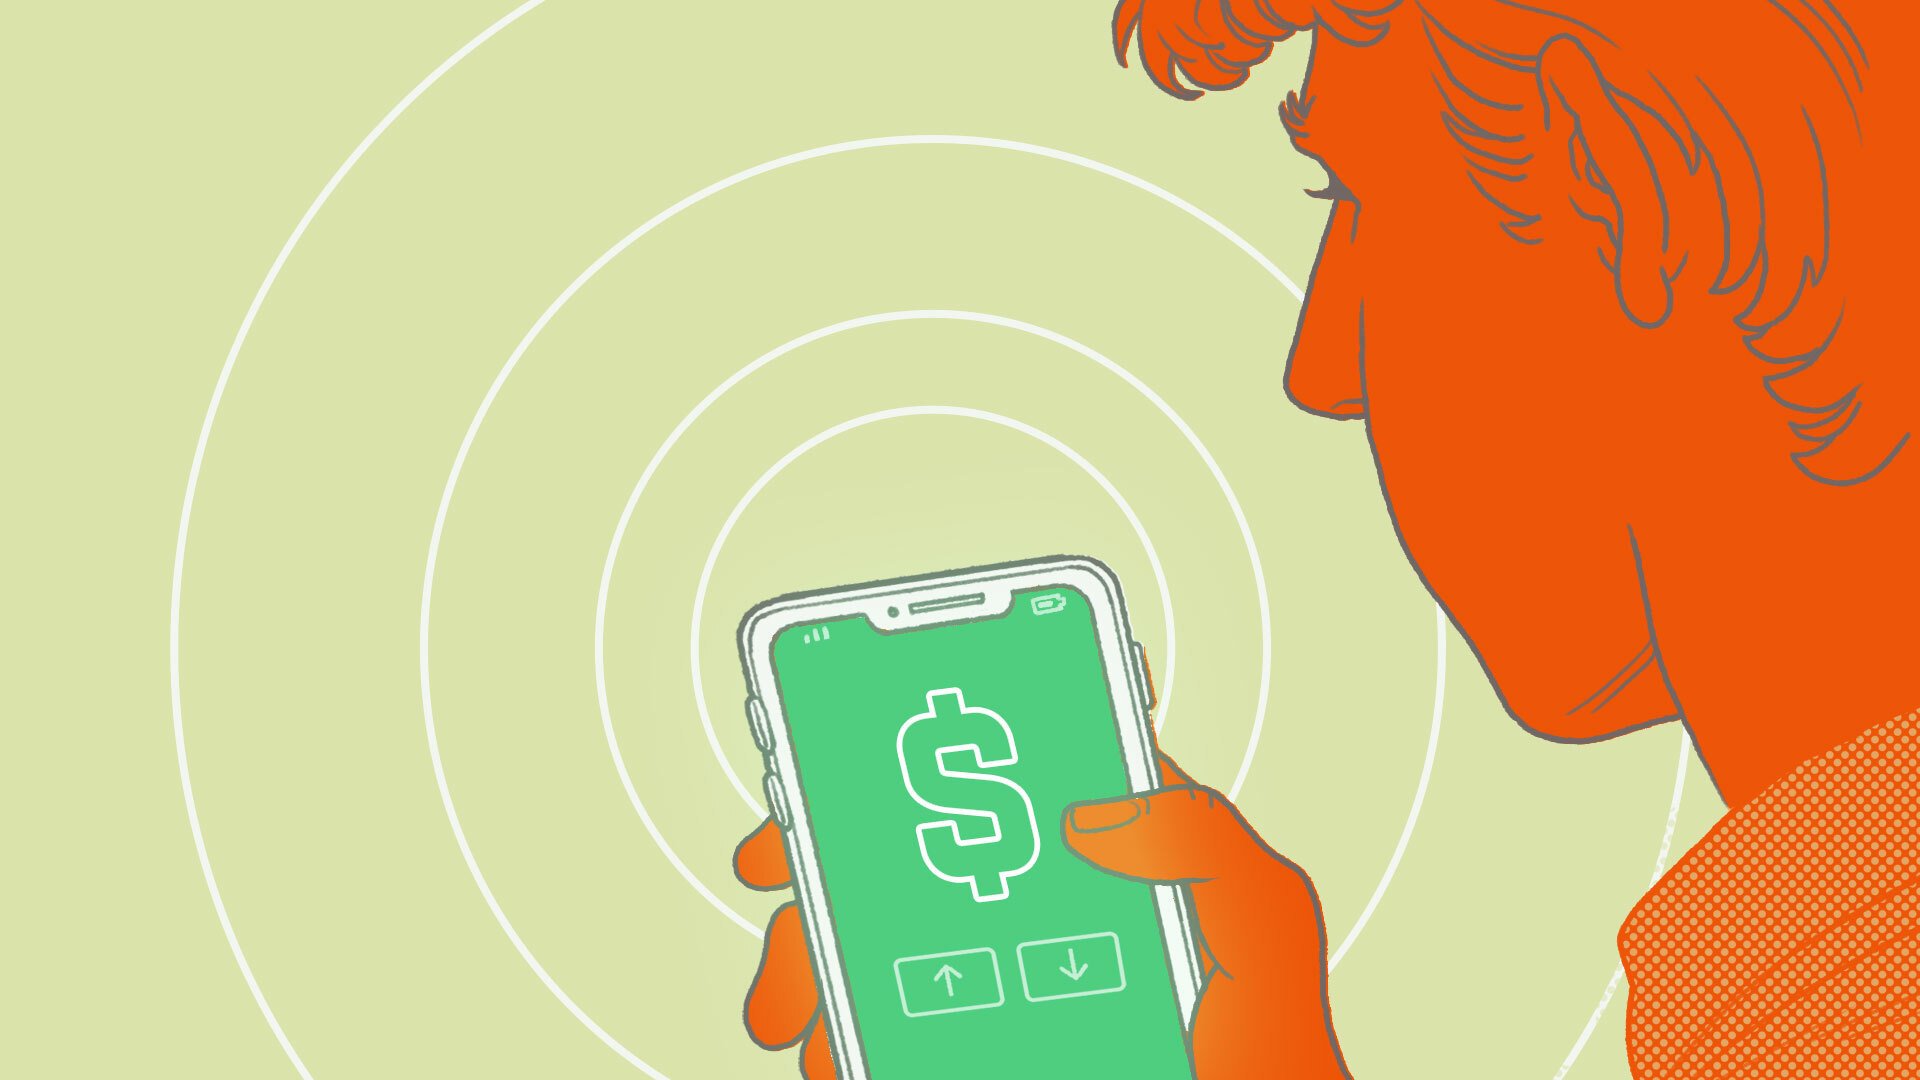 An illustration of a man holding a phone. On the screen is a big green dollar sign.